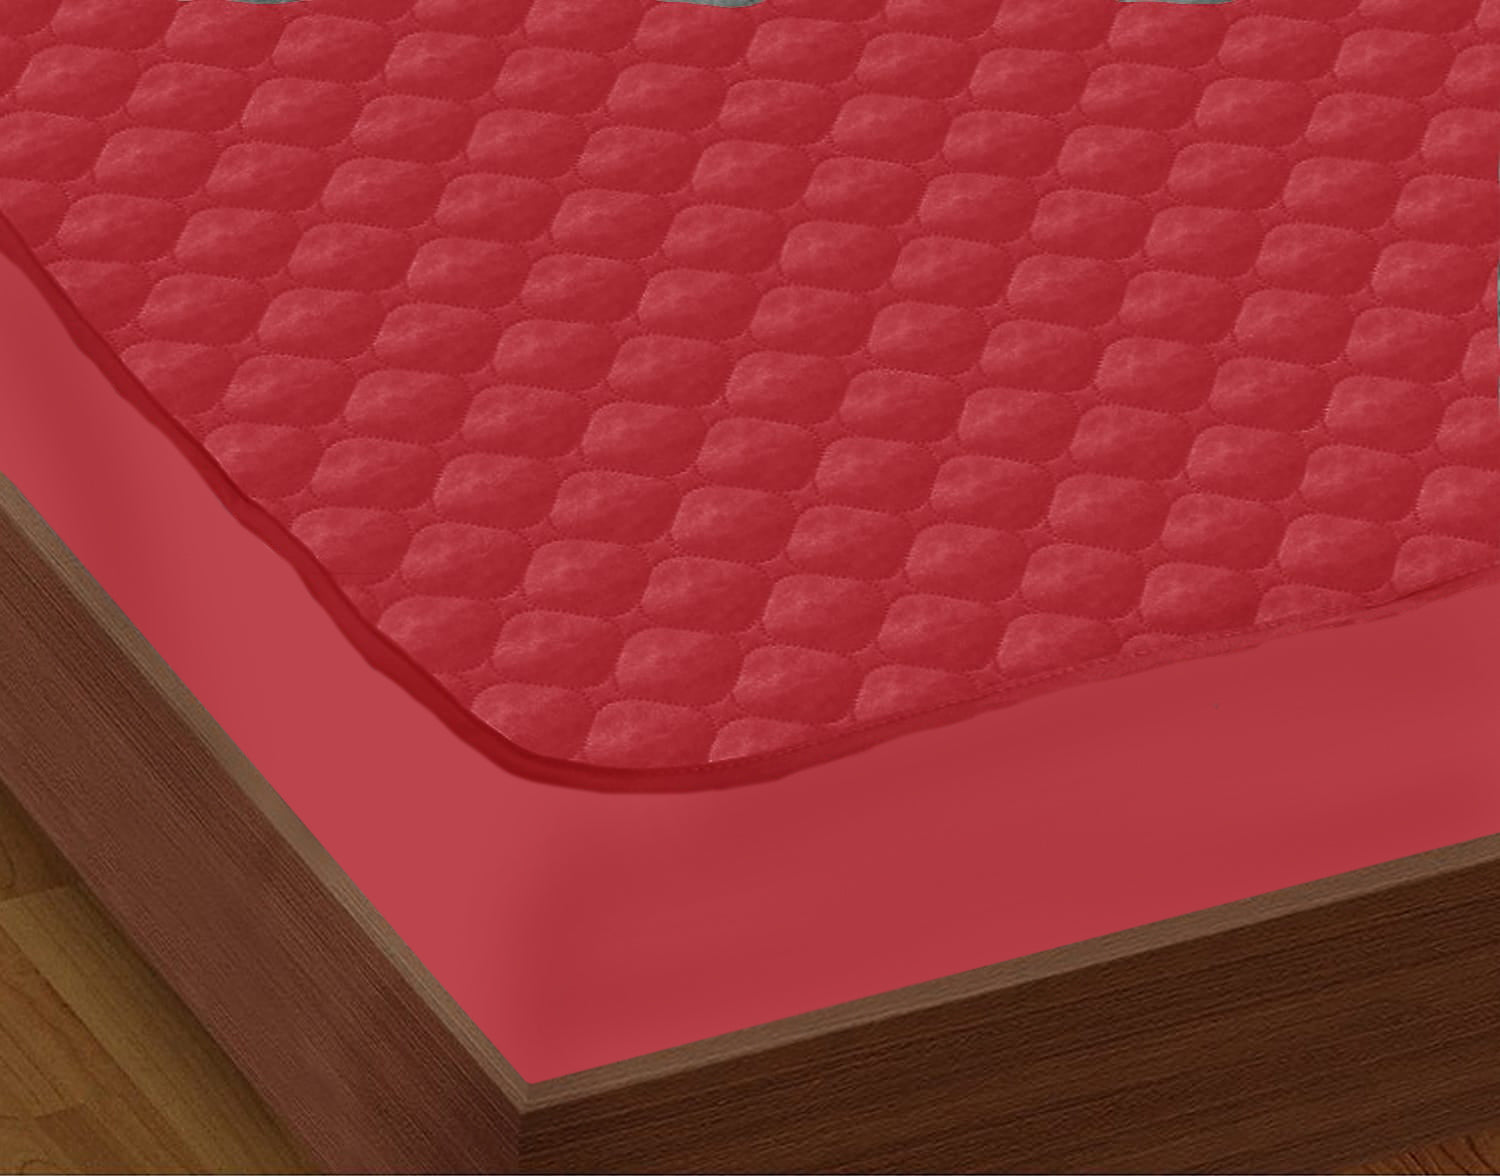 AURAVE Premium Fitted Water Proof Mattress Protector - Red